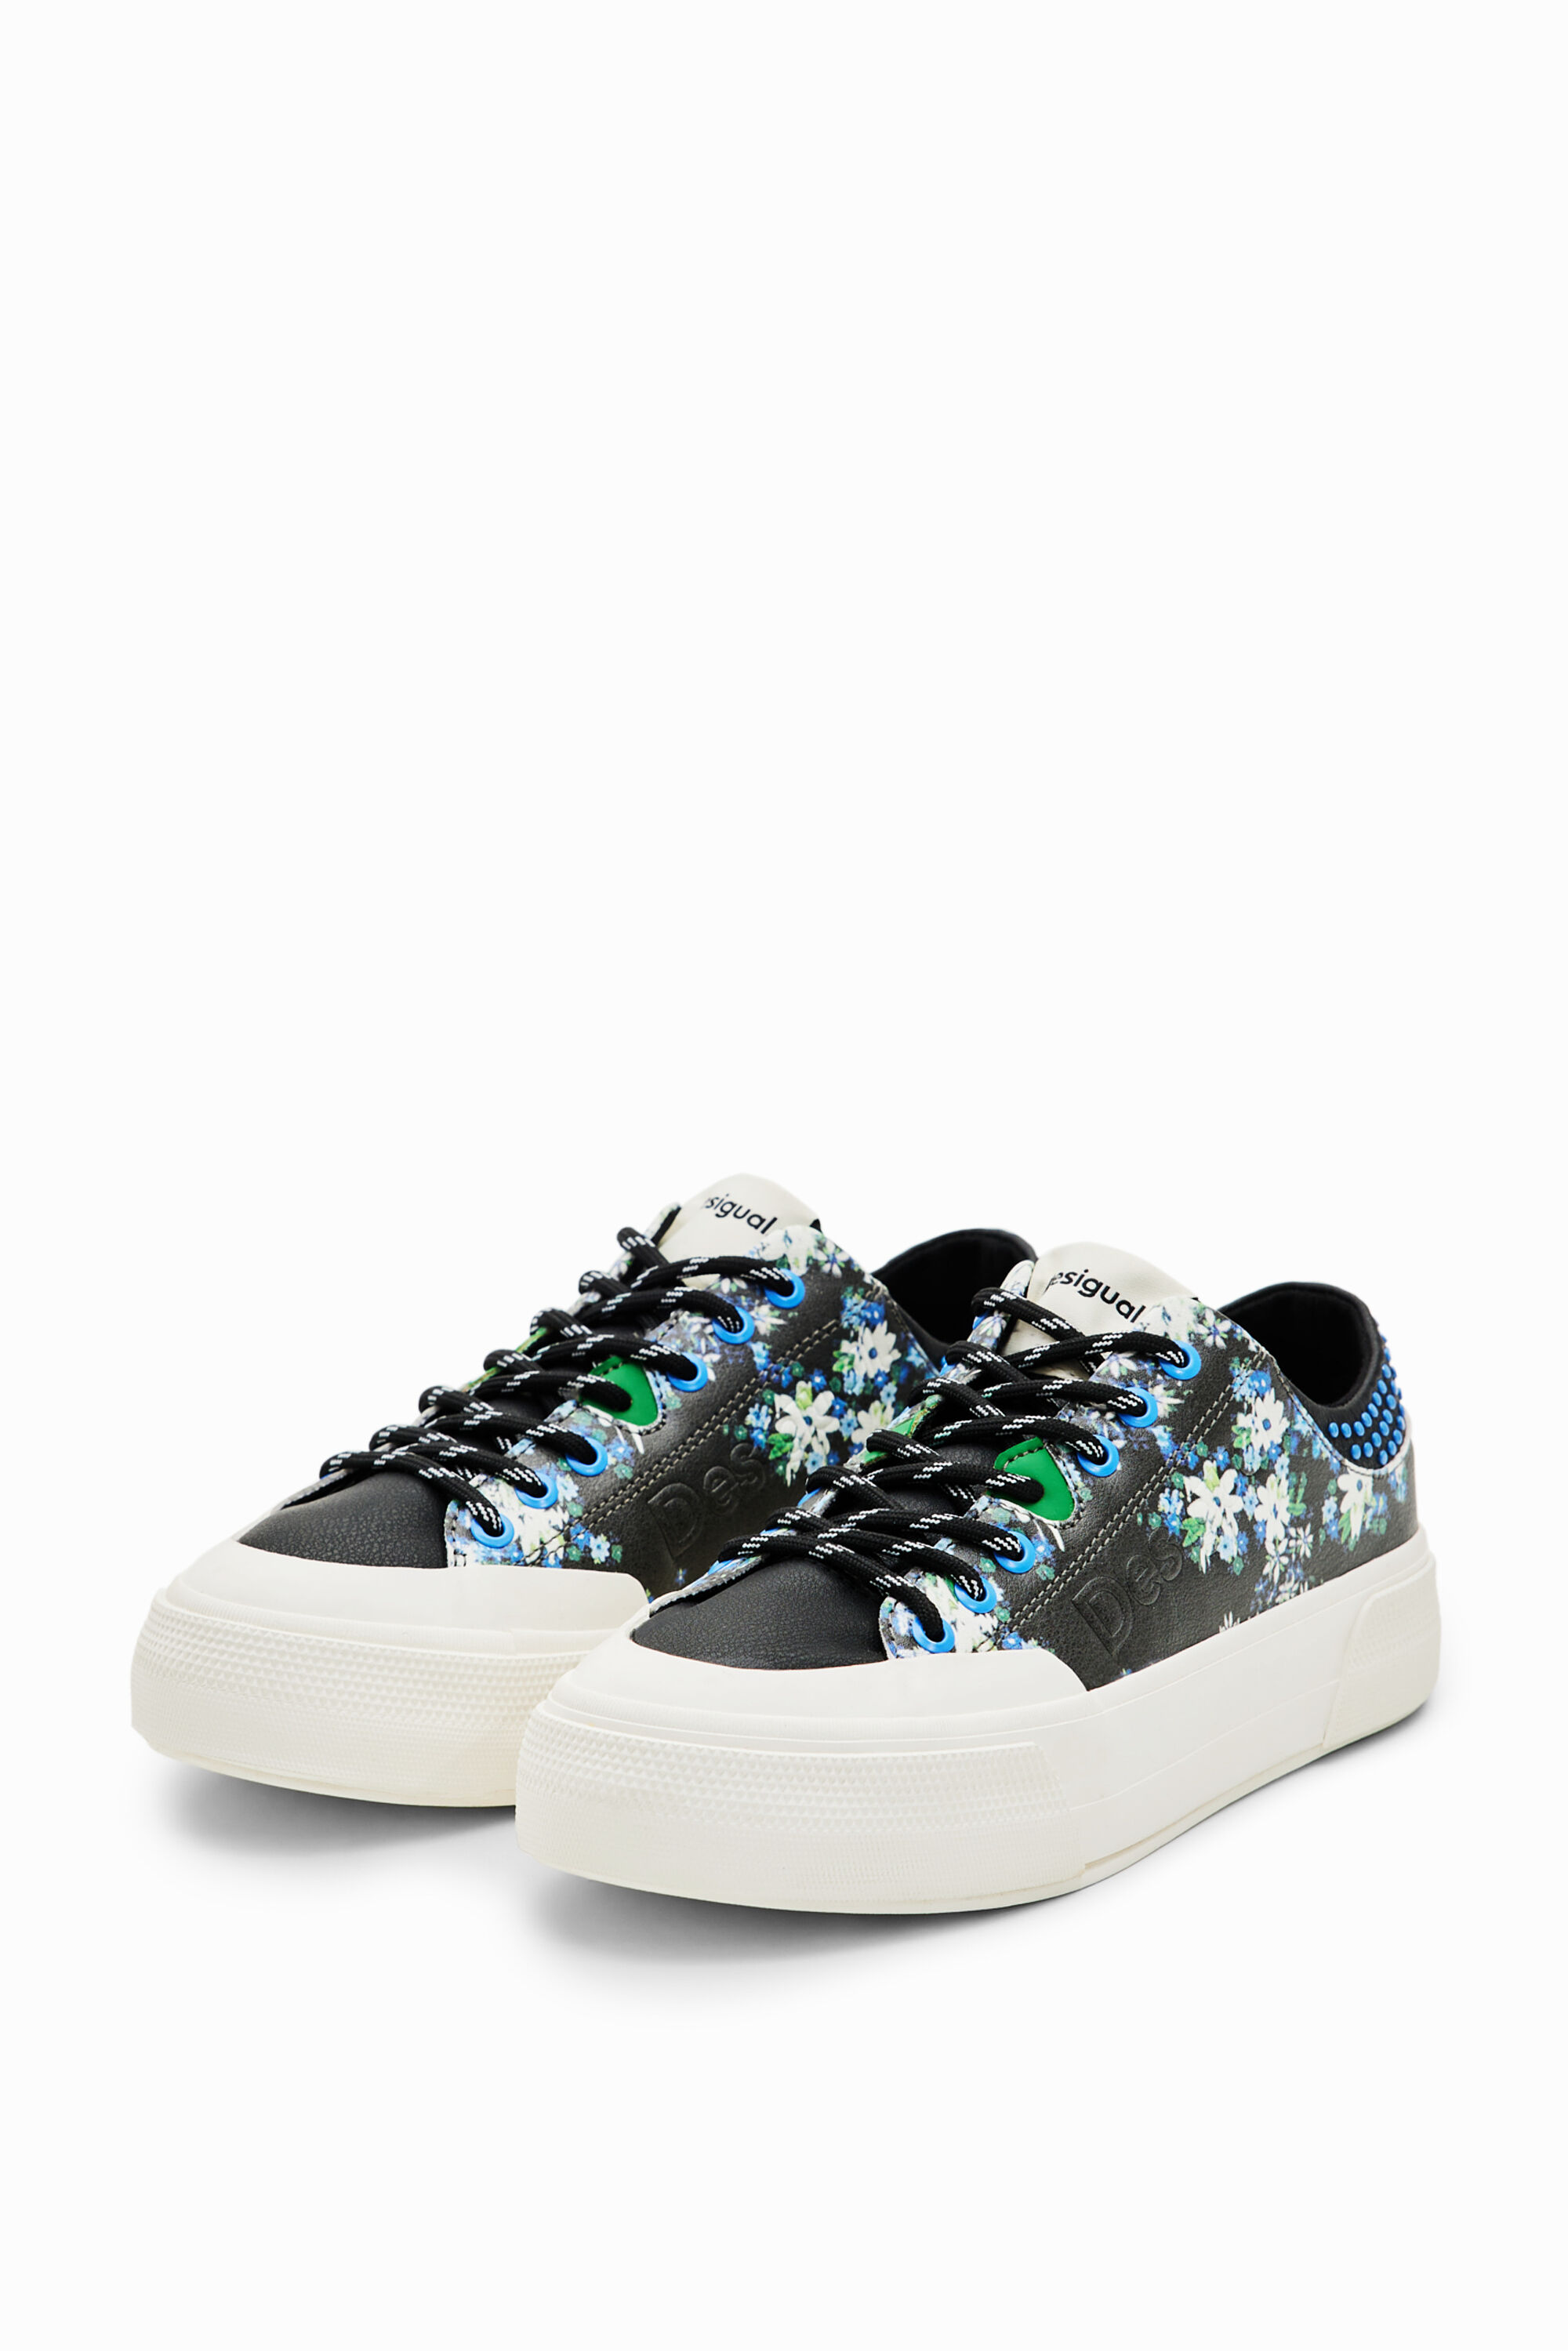 Floral platform sneakers - MATERIAL FINISHES - 41